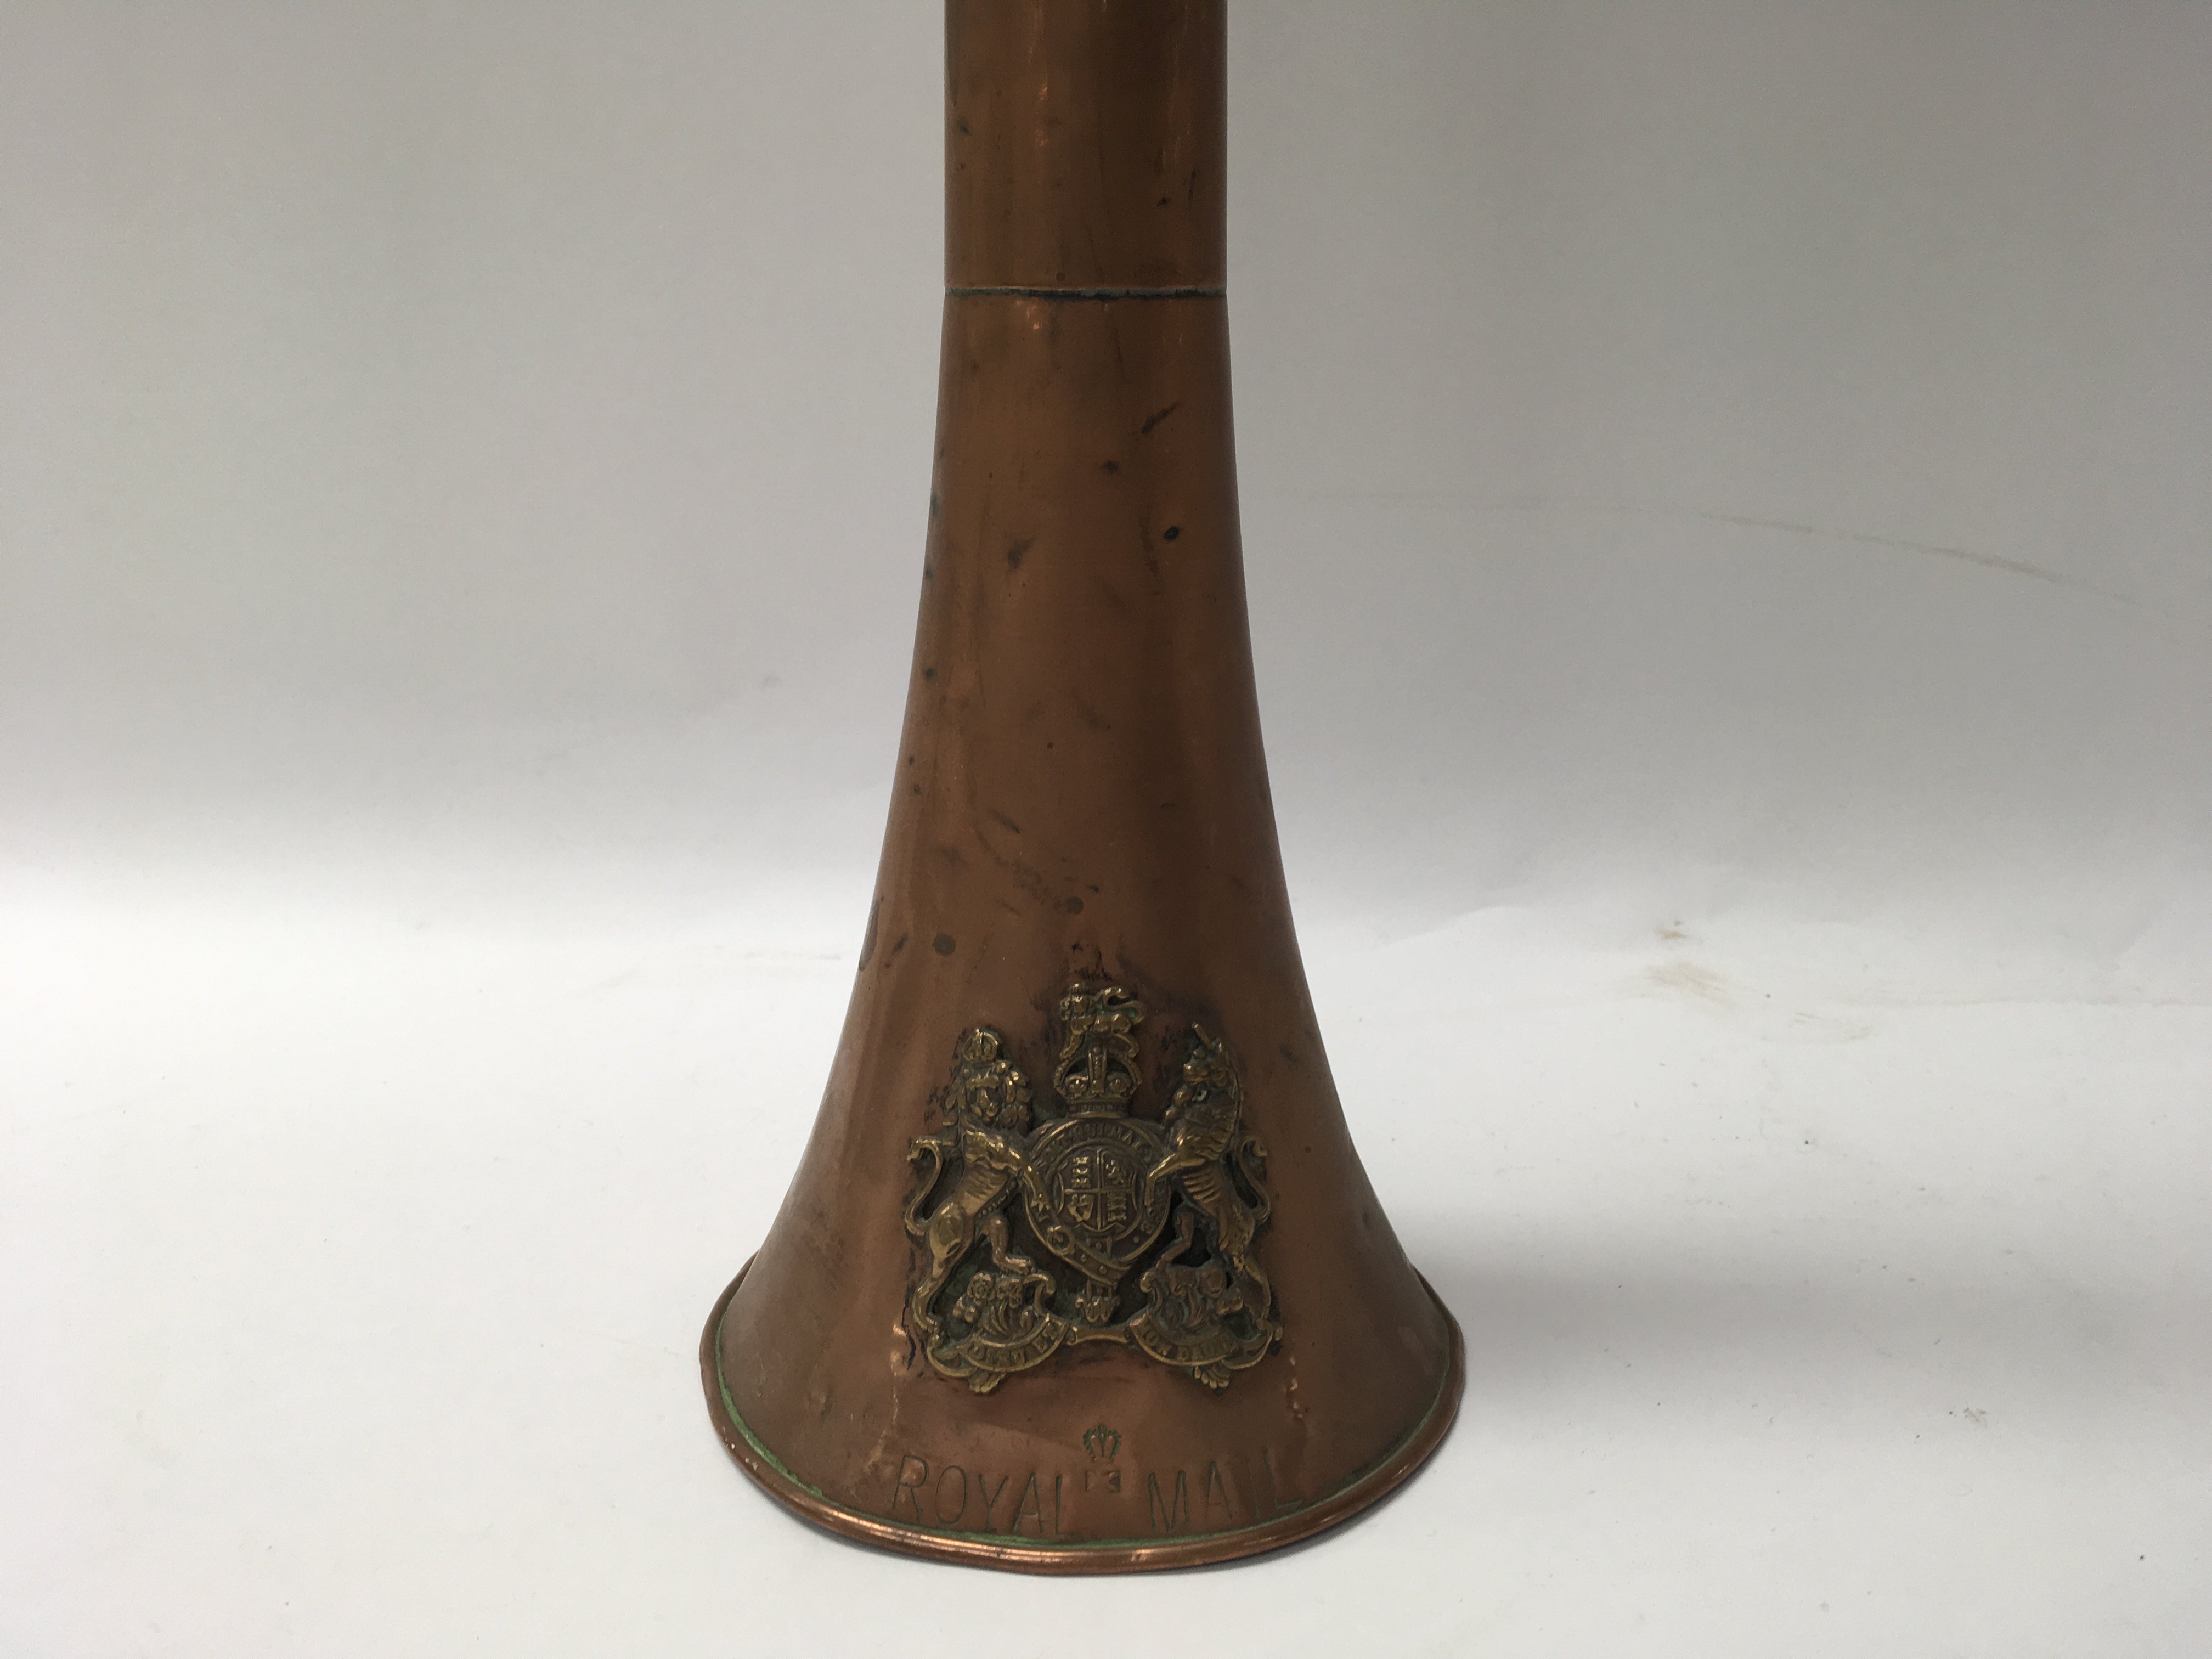 A large copper horn with “Royal Mail” stamped and attached brass coat of arms. Length approx 117cm.